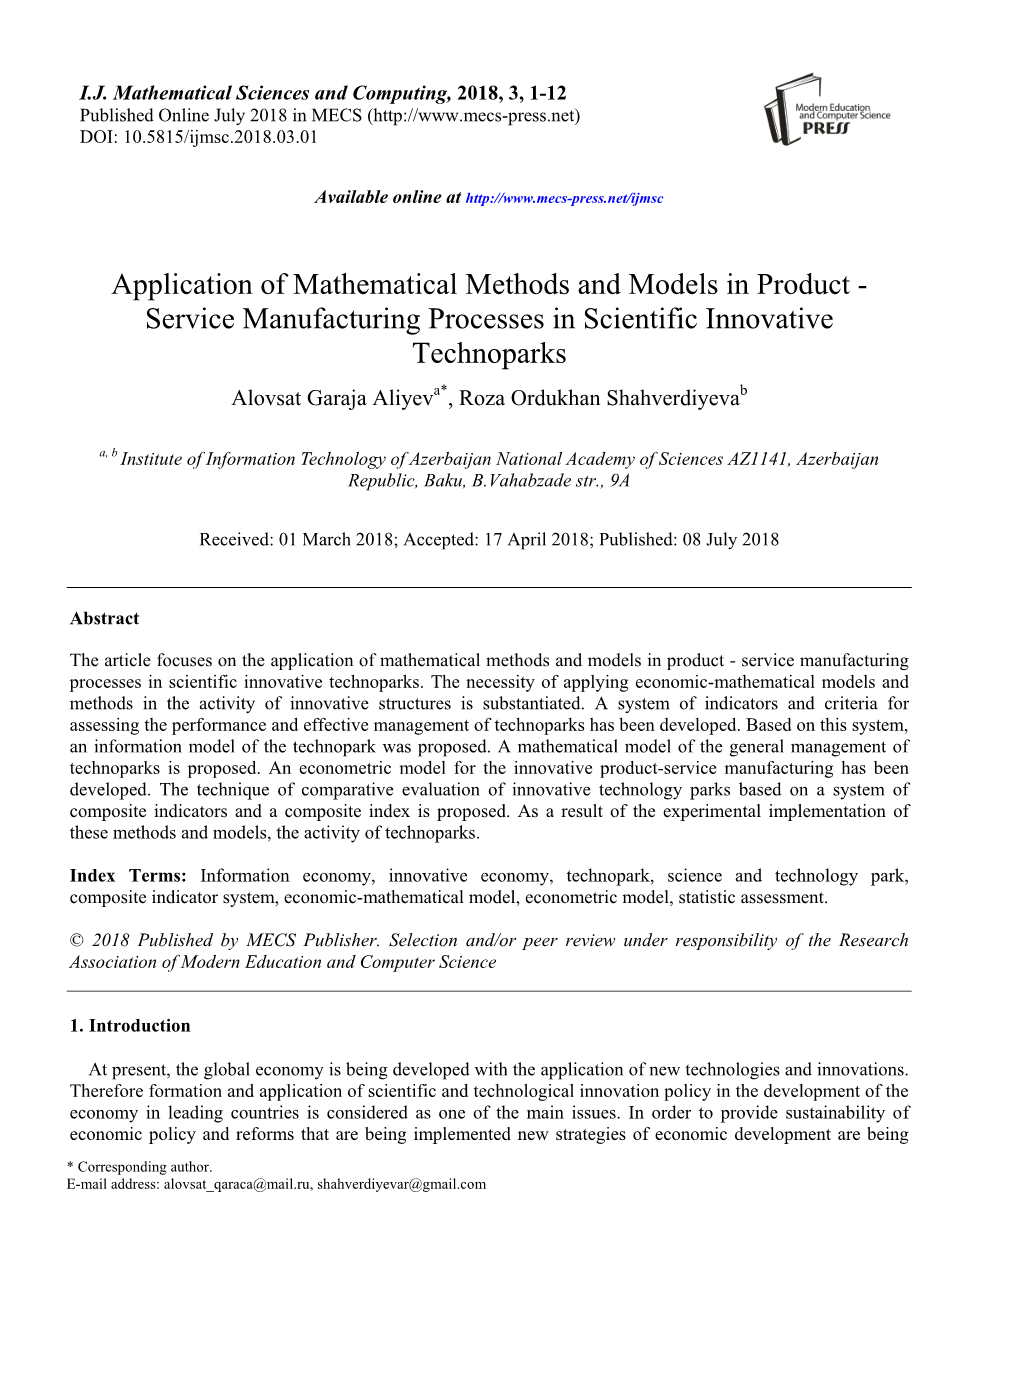 Application of Mathematical Methods and Models in Product